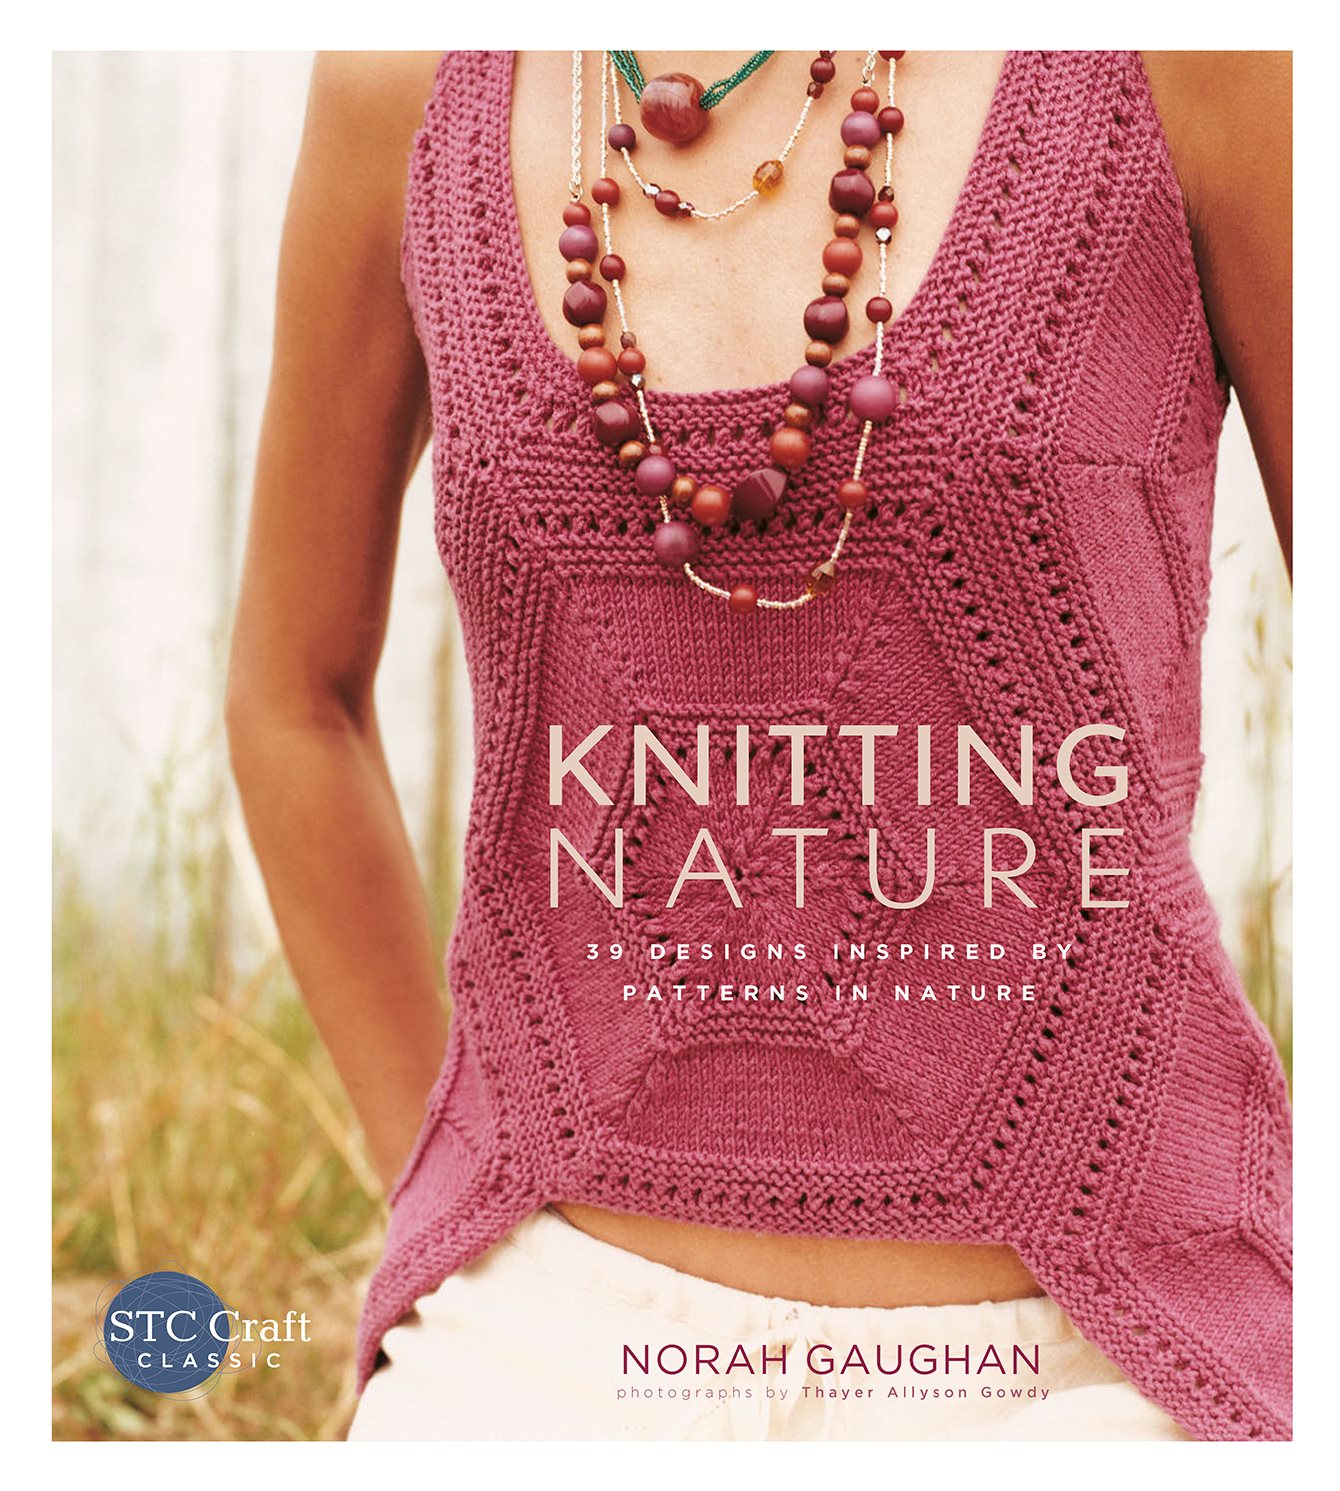 KNITTING NATURE 39 DESIGNS INSPIRED BY PATTERNS IN NATURE NORAH GAUGHAN - photo 1